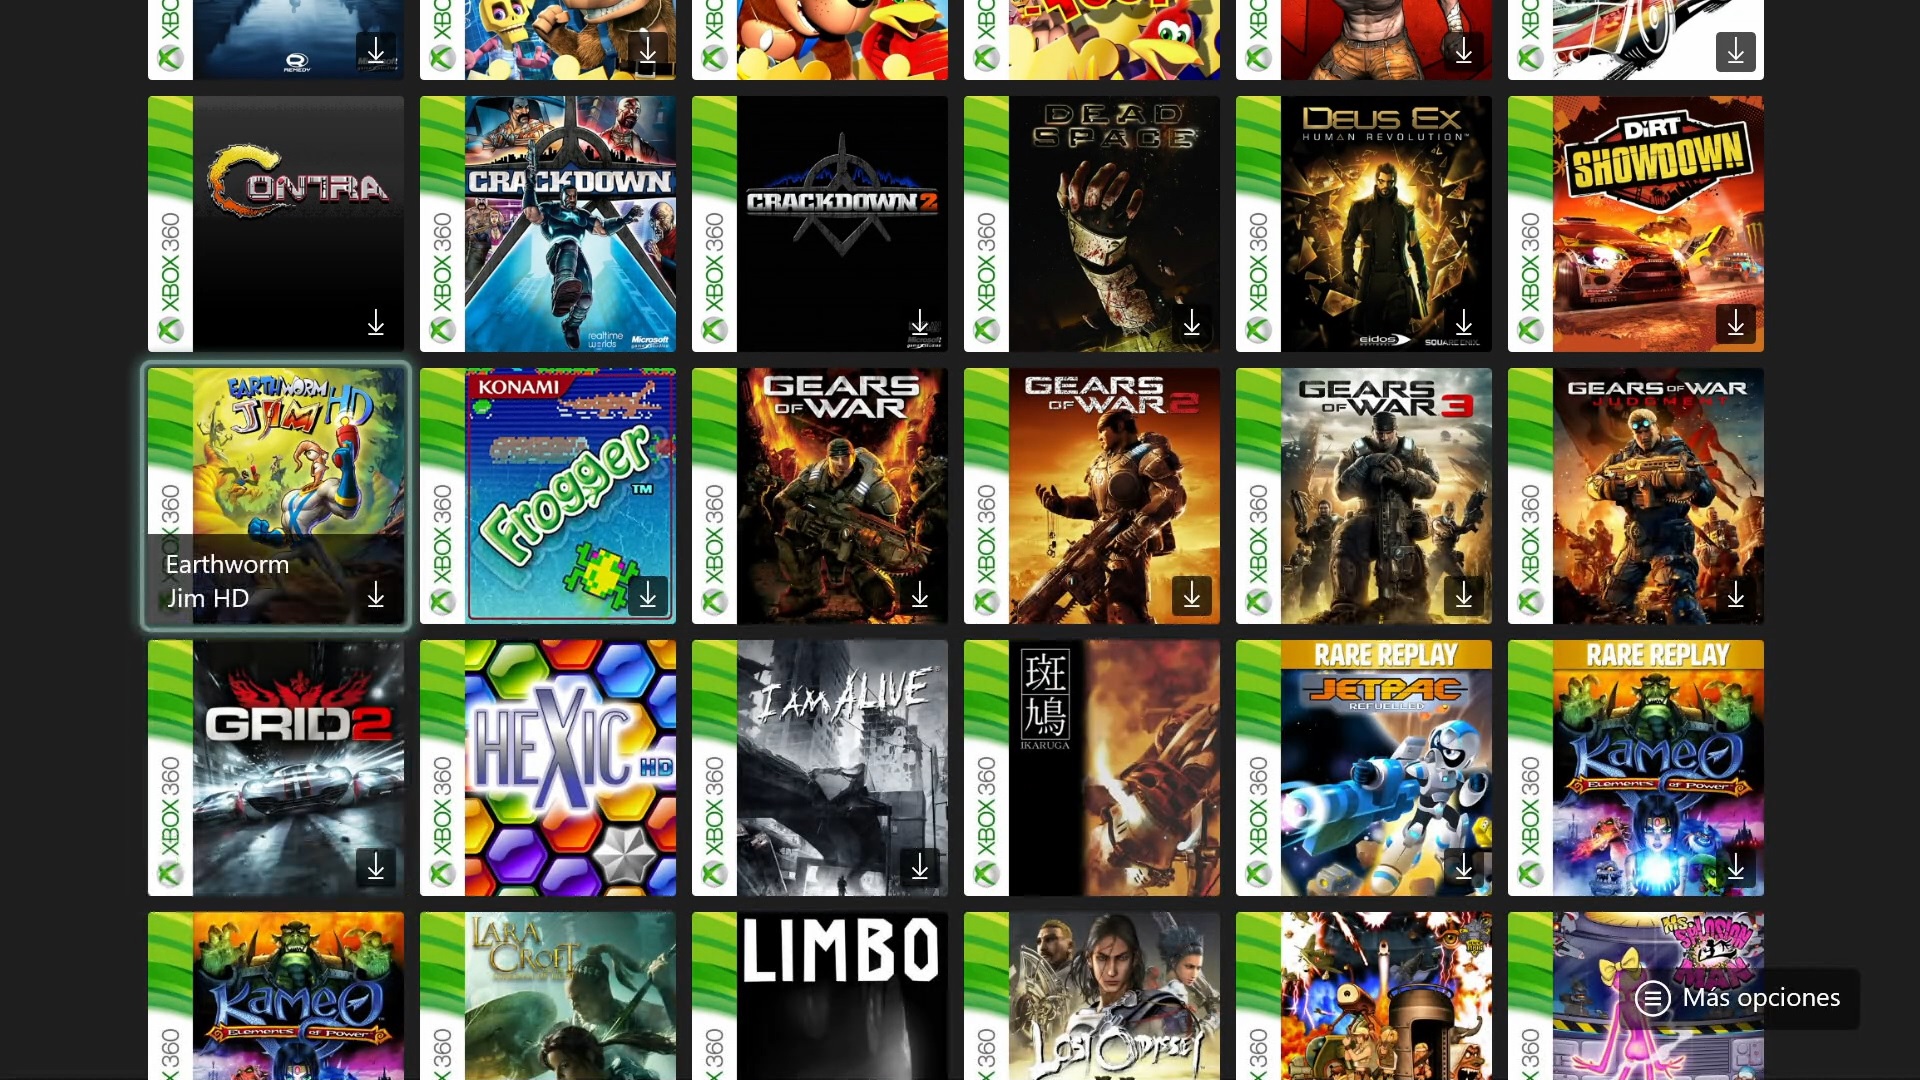 https://www.anaitgames.com/wp-content/uploads/2020/11/xbox-series-x-review-retrocompatibilidad-1.jpg